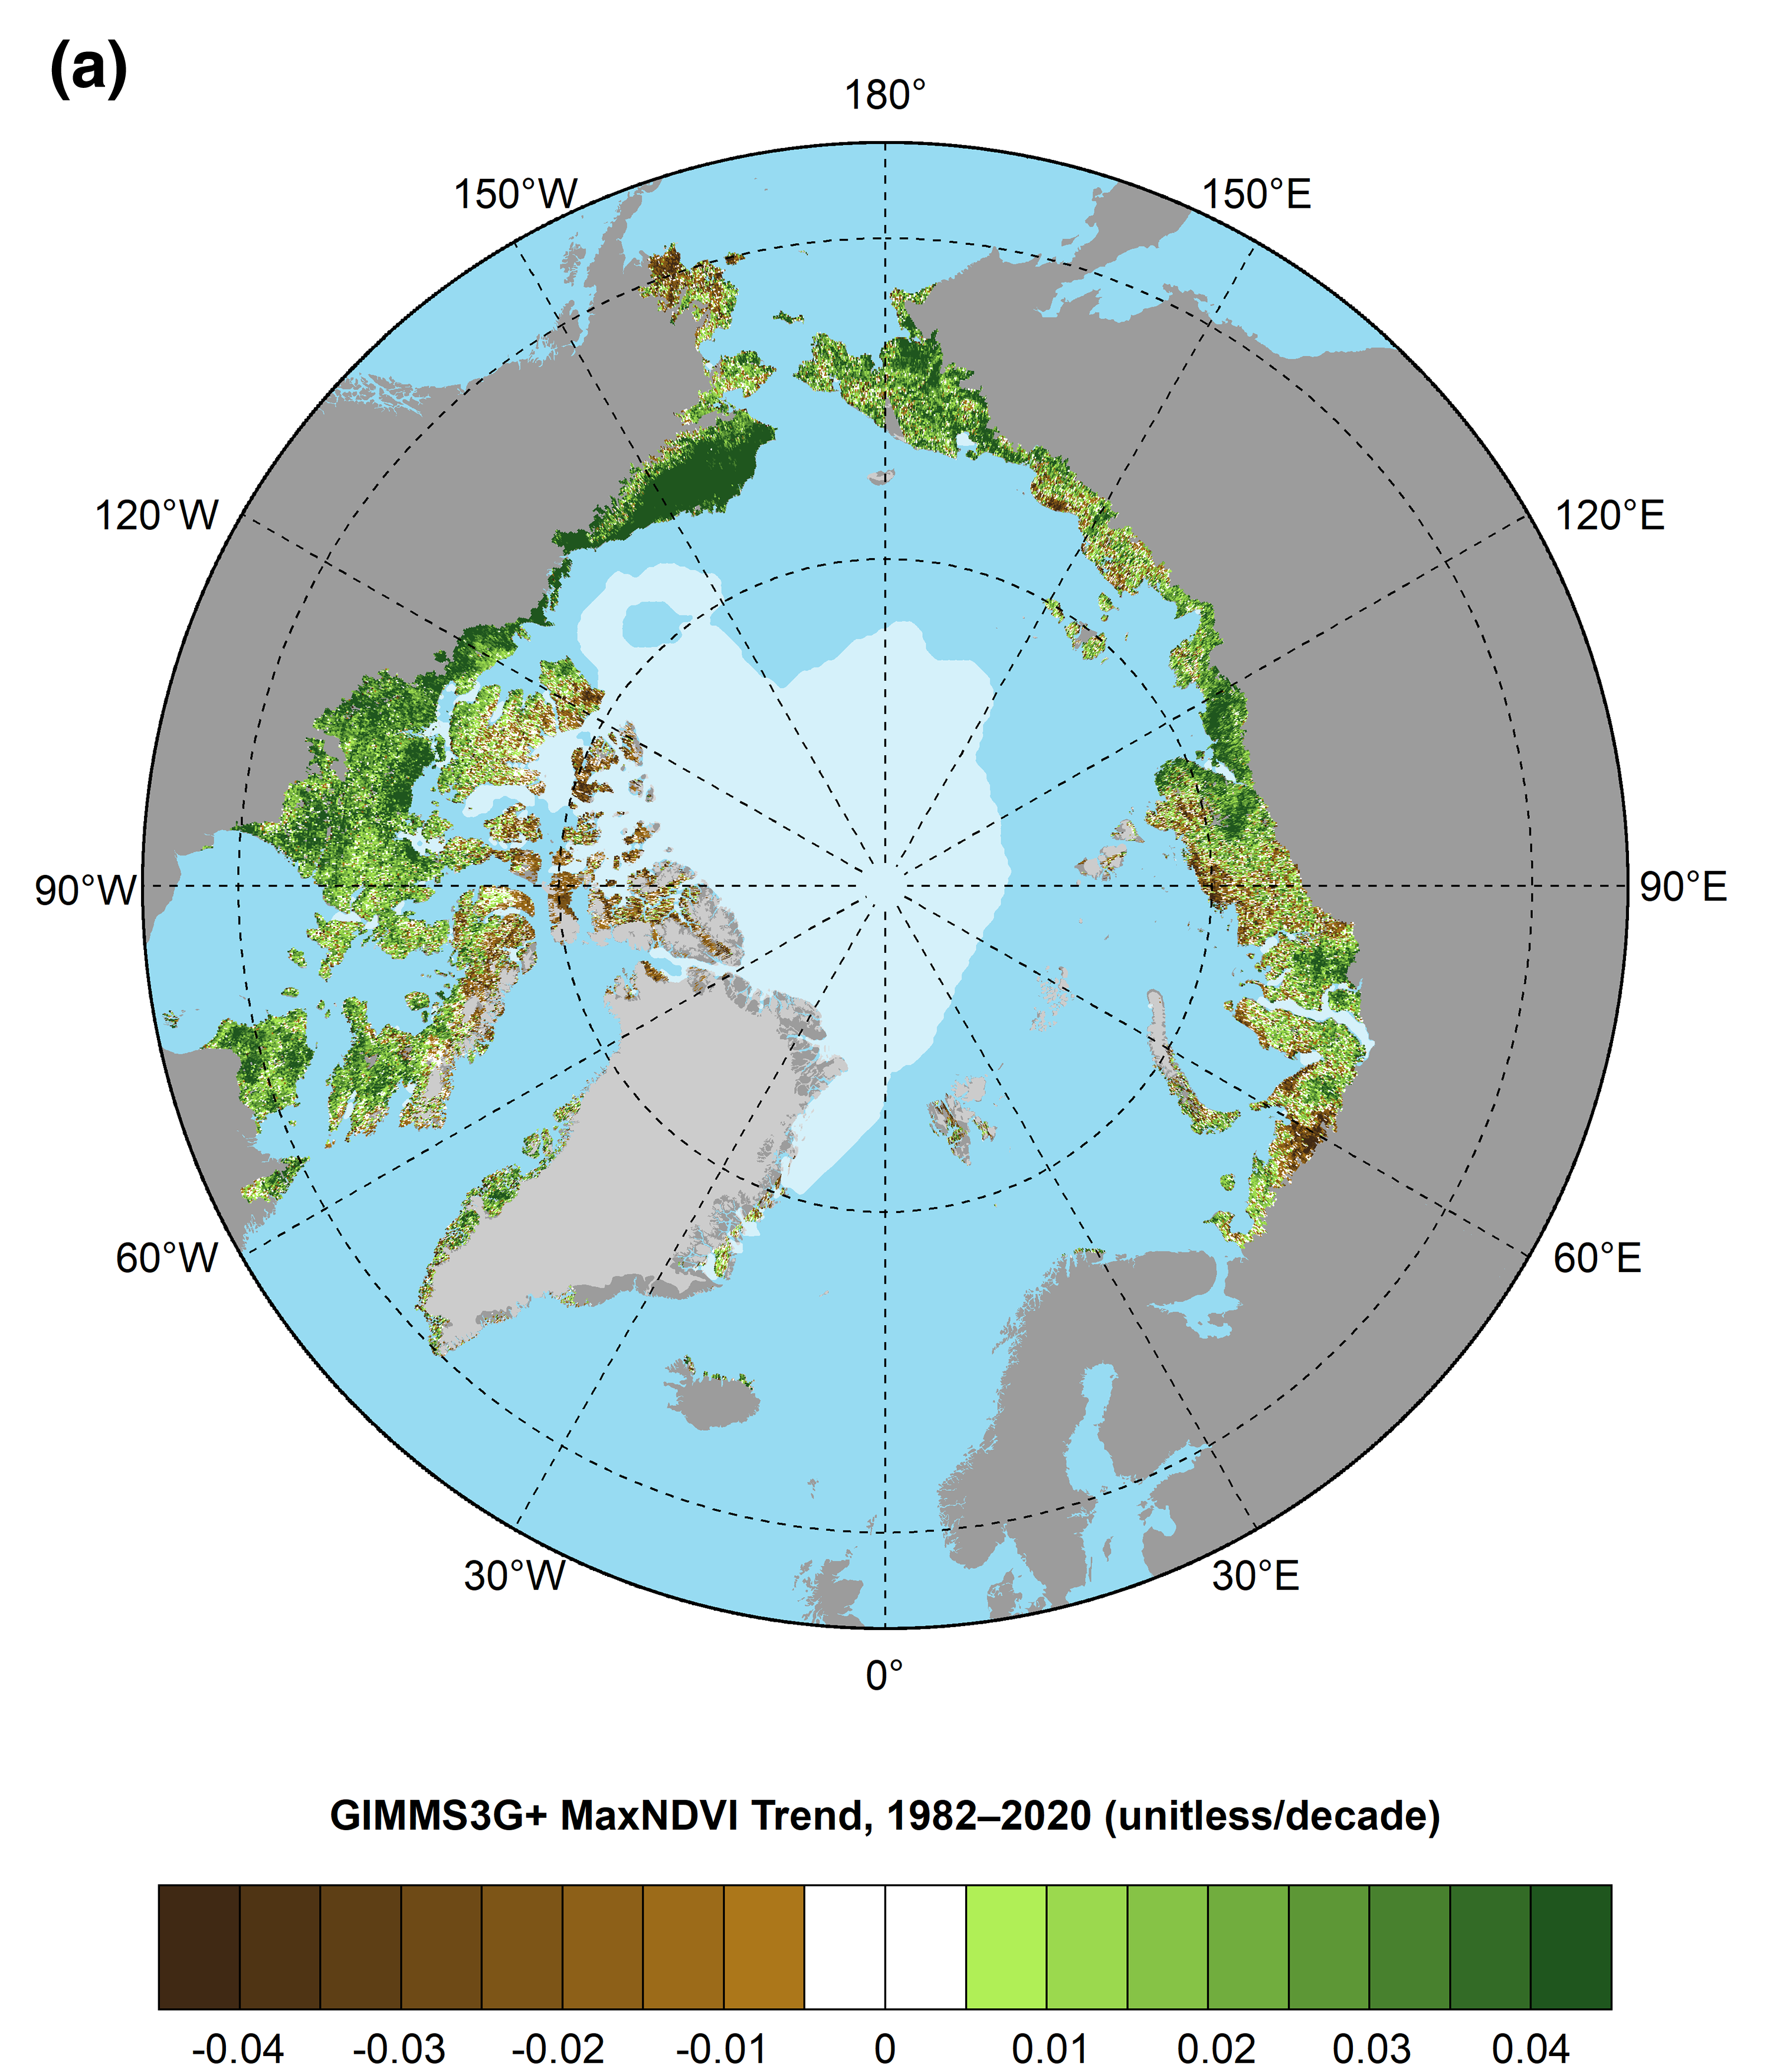 Geography, Climate and Species of Earth's Arctic Region